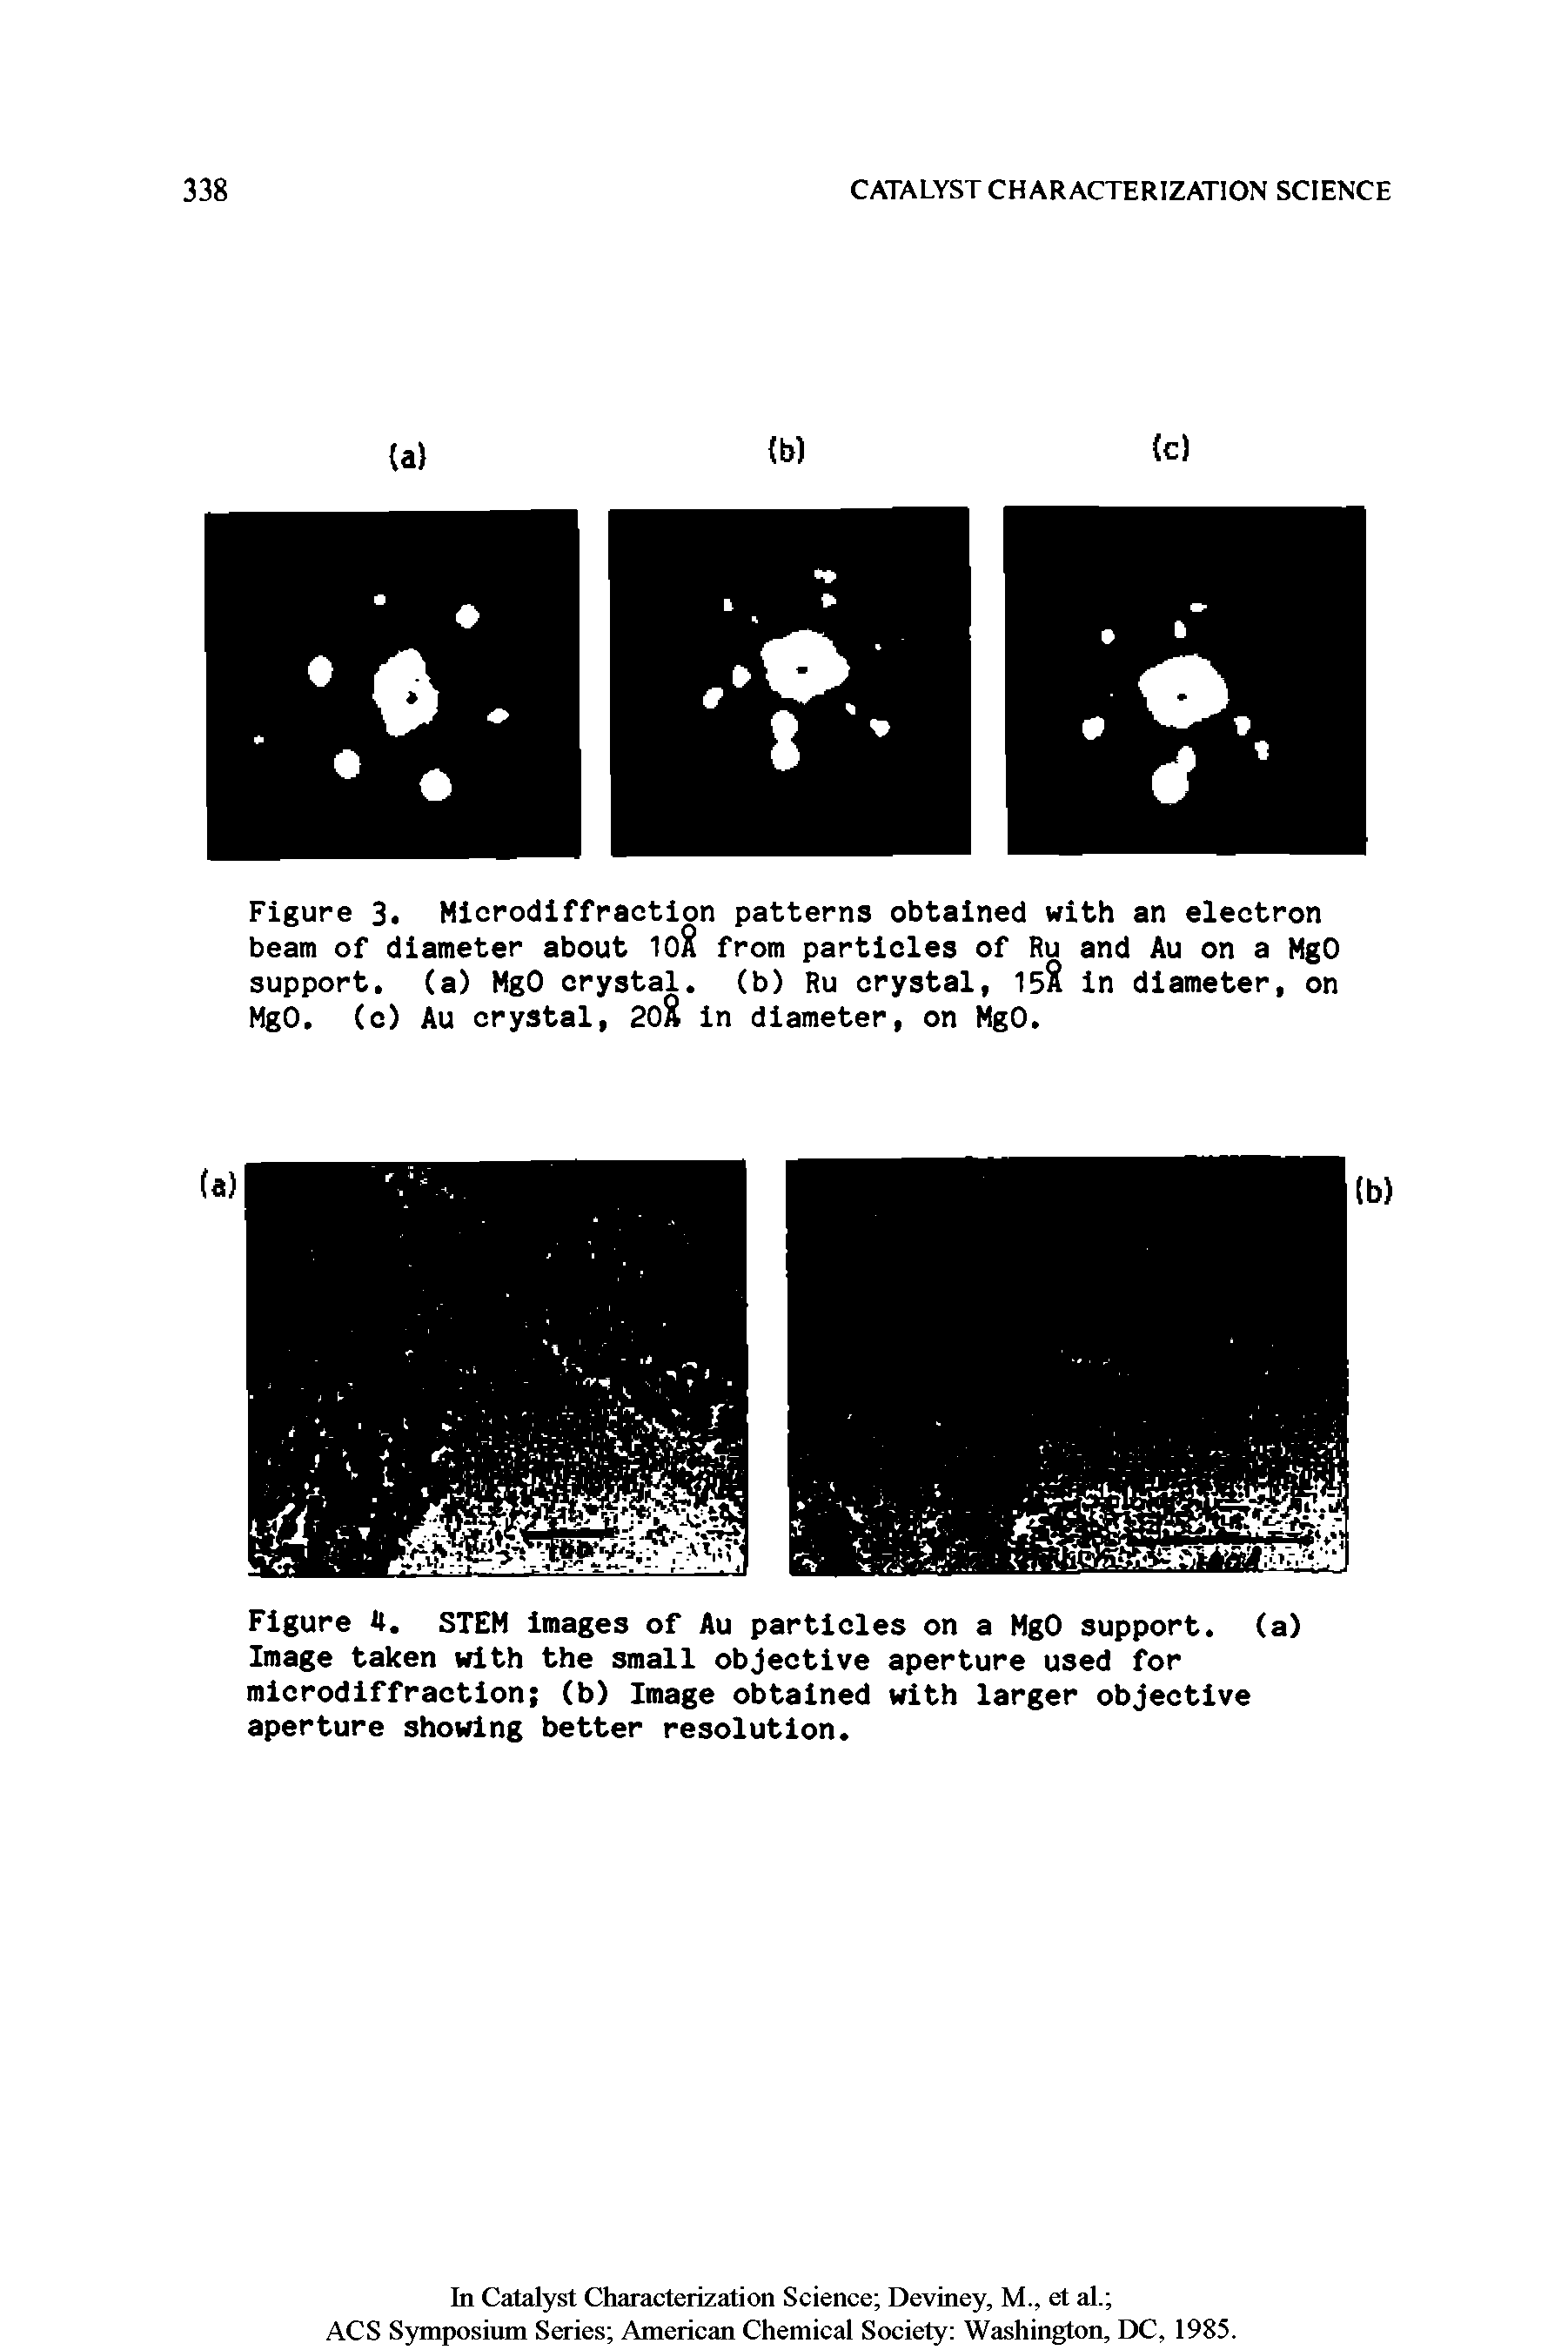 Figure 4. STEM images of Au particles on a MgO support, (a) Image taken with the small objective aperture used for microdiffraction (b) Image obtained with larger objective aperture showing better resolution.